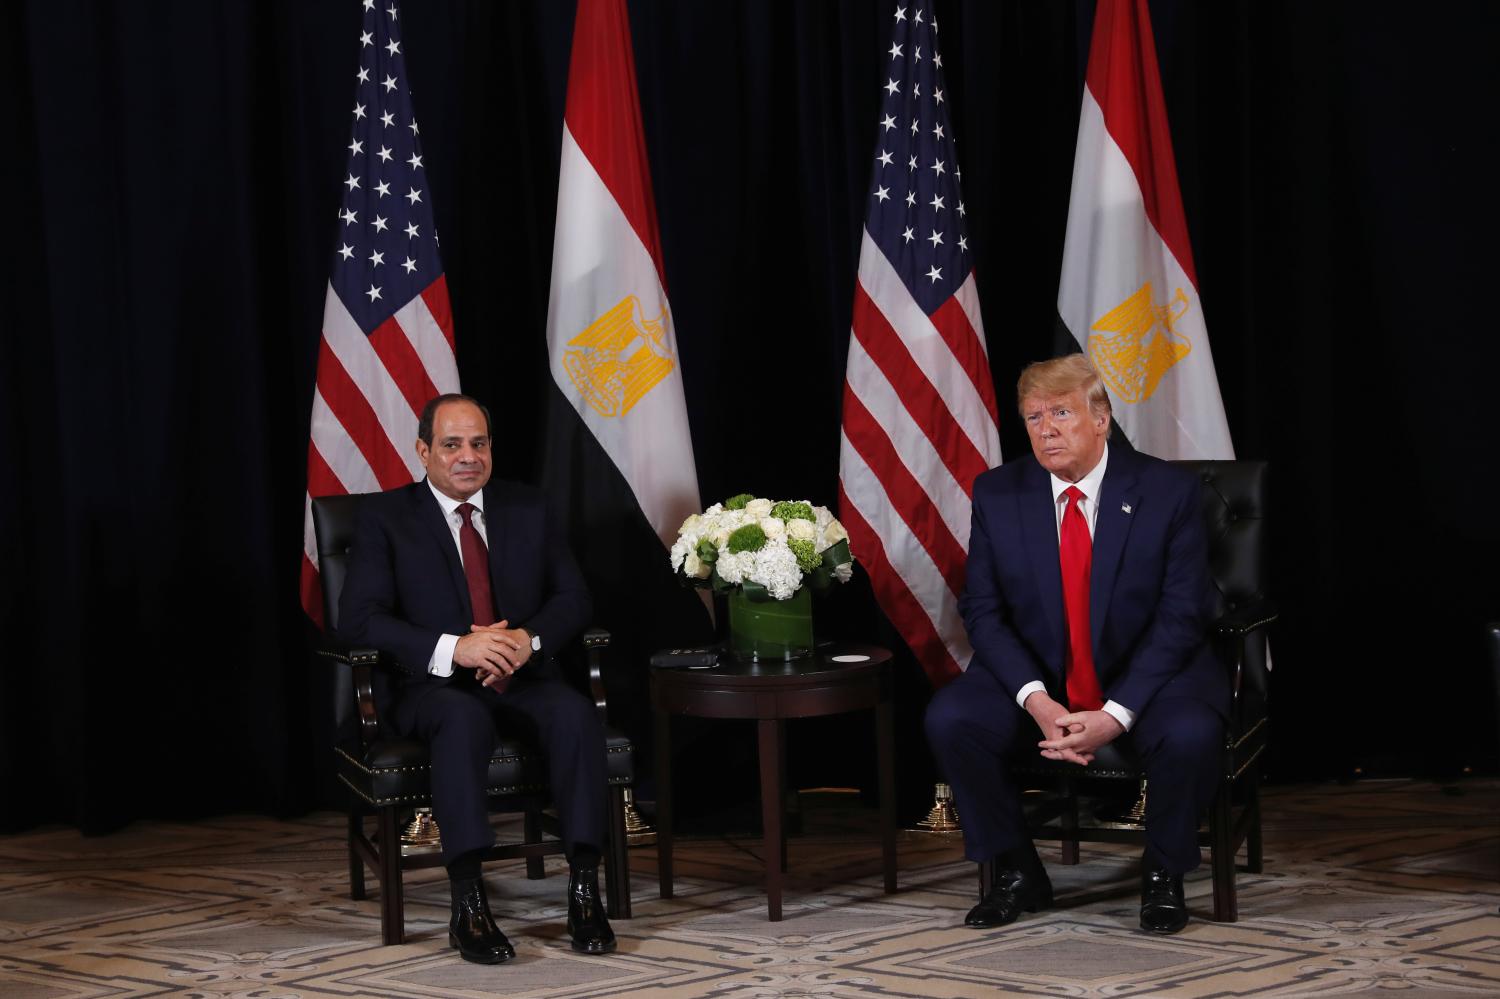 U.S. President Donald Trump holds a bilateral meeting with Egypt's President Abdel Fattah el-Sisi on the sidelines of the annual United Nations General Assembly meeting in New York City, New York, U.S., September 23, 2019. REUTERS/Jonathan Ernst